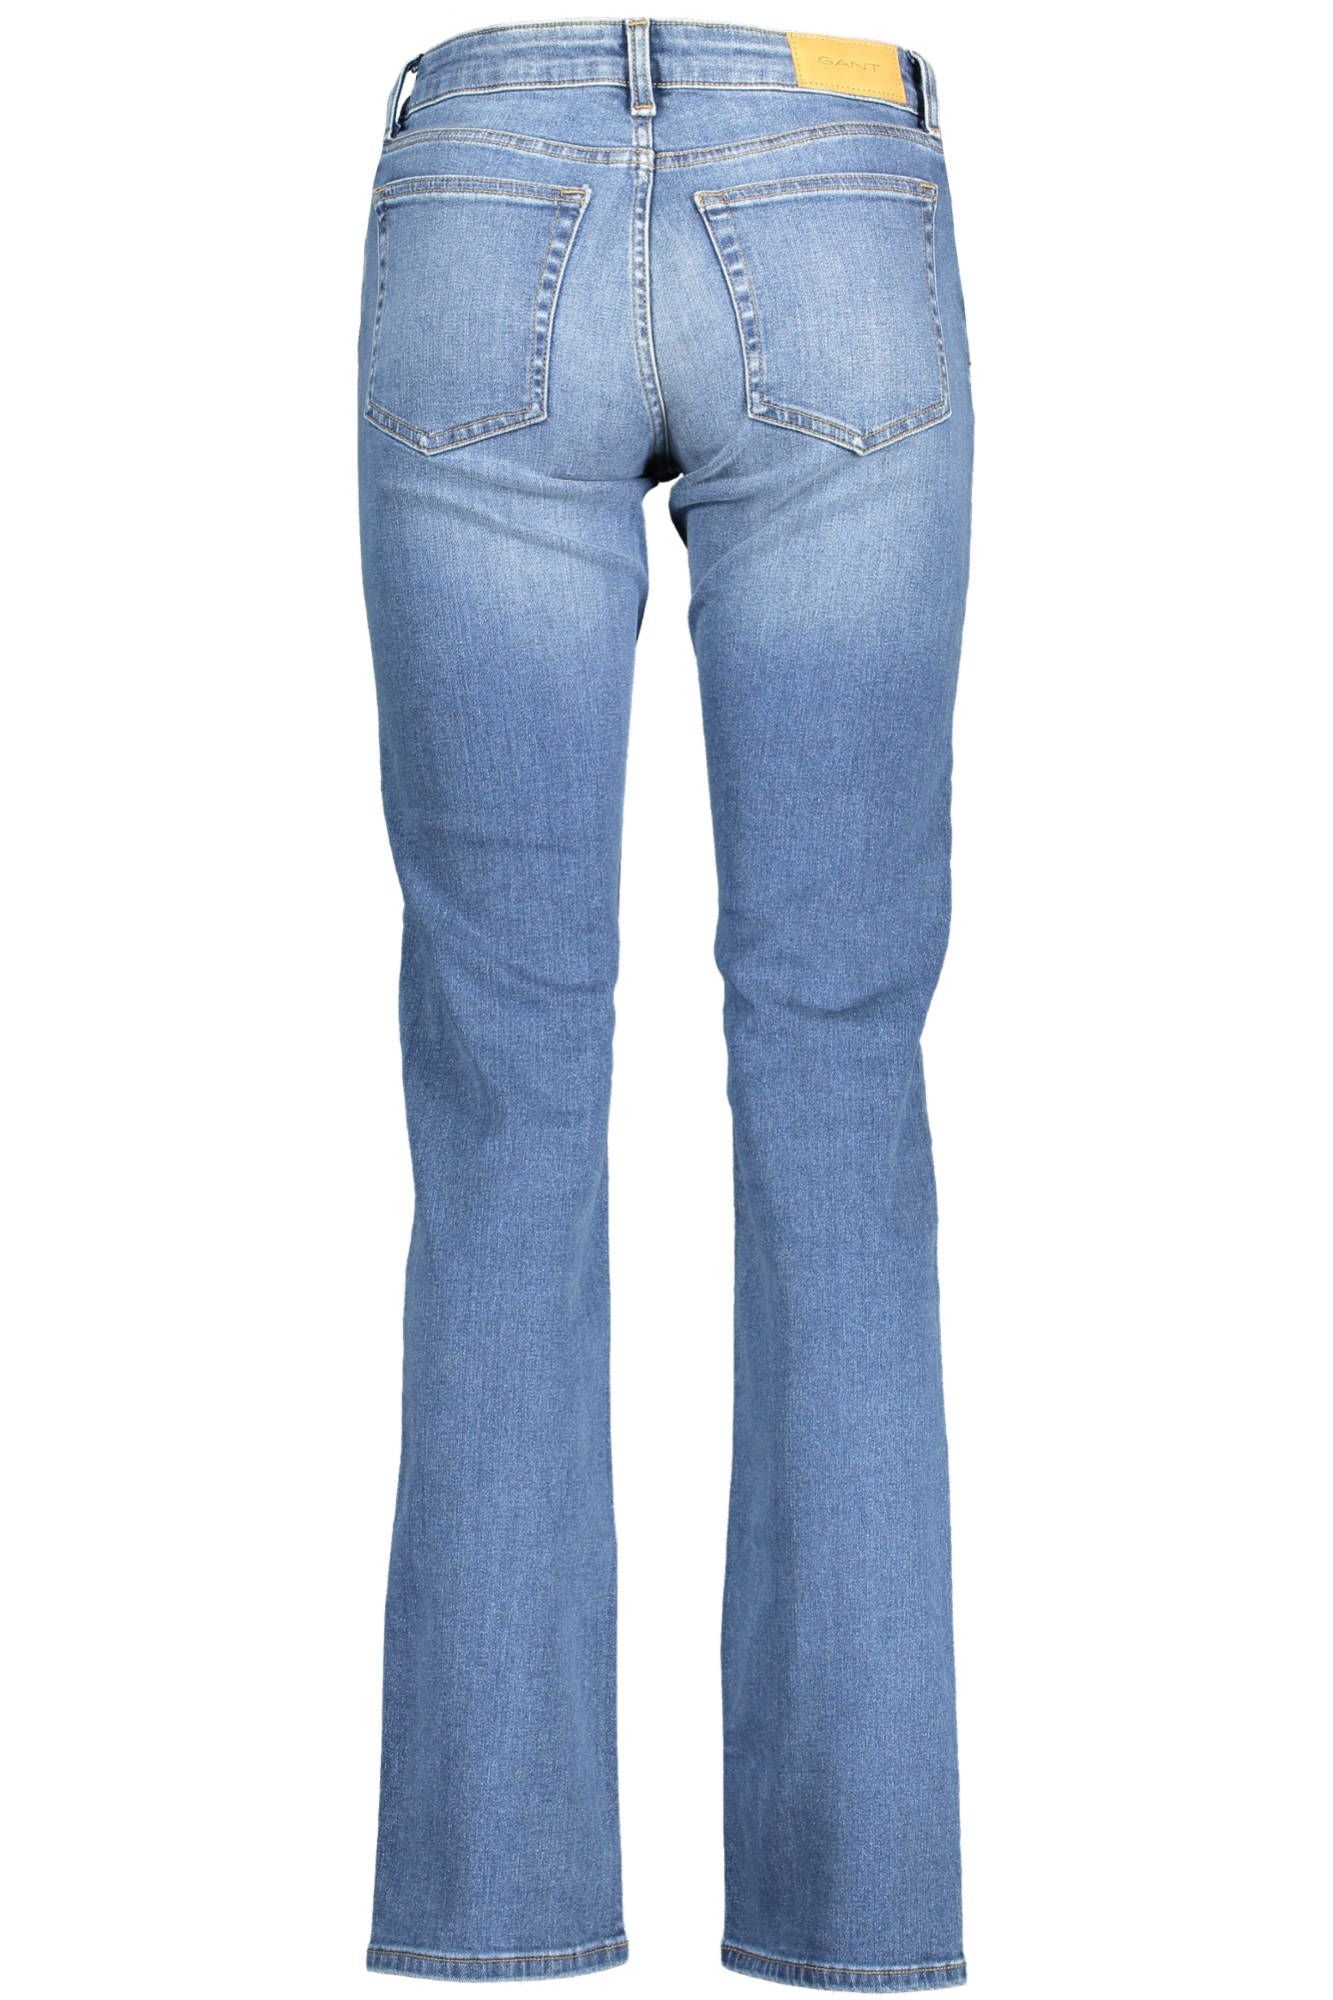 Gant slim-fit faded blue jeans